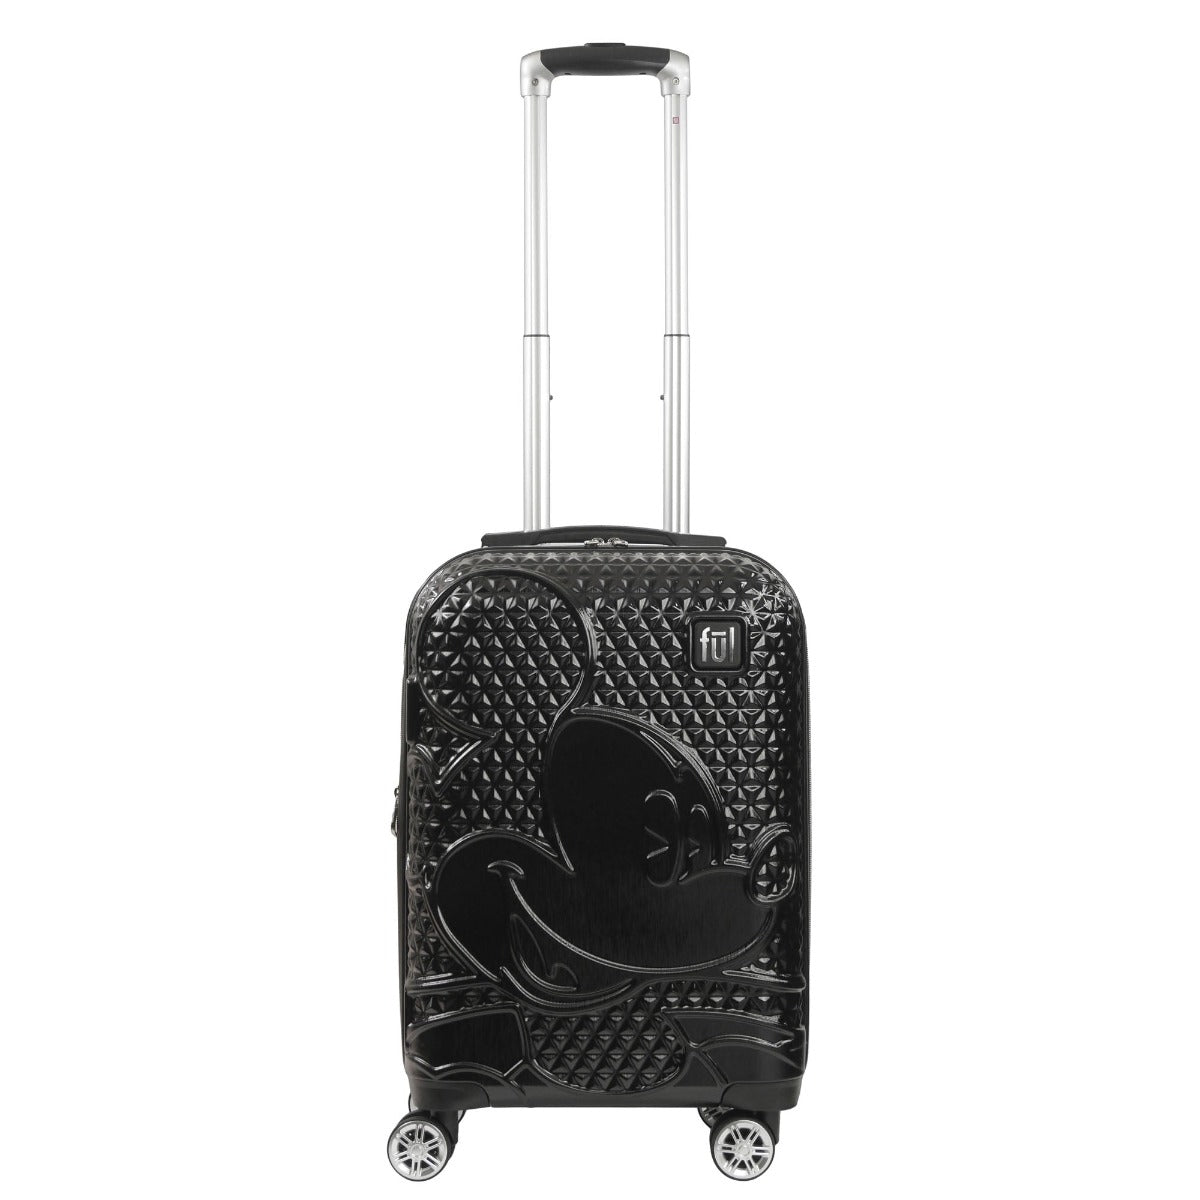 Black Disney Mickey Mouse textured raised shape 22.5" carry-on hardside spinner suitcase with ID tags - best traveling luggage for kids and adults